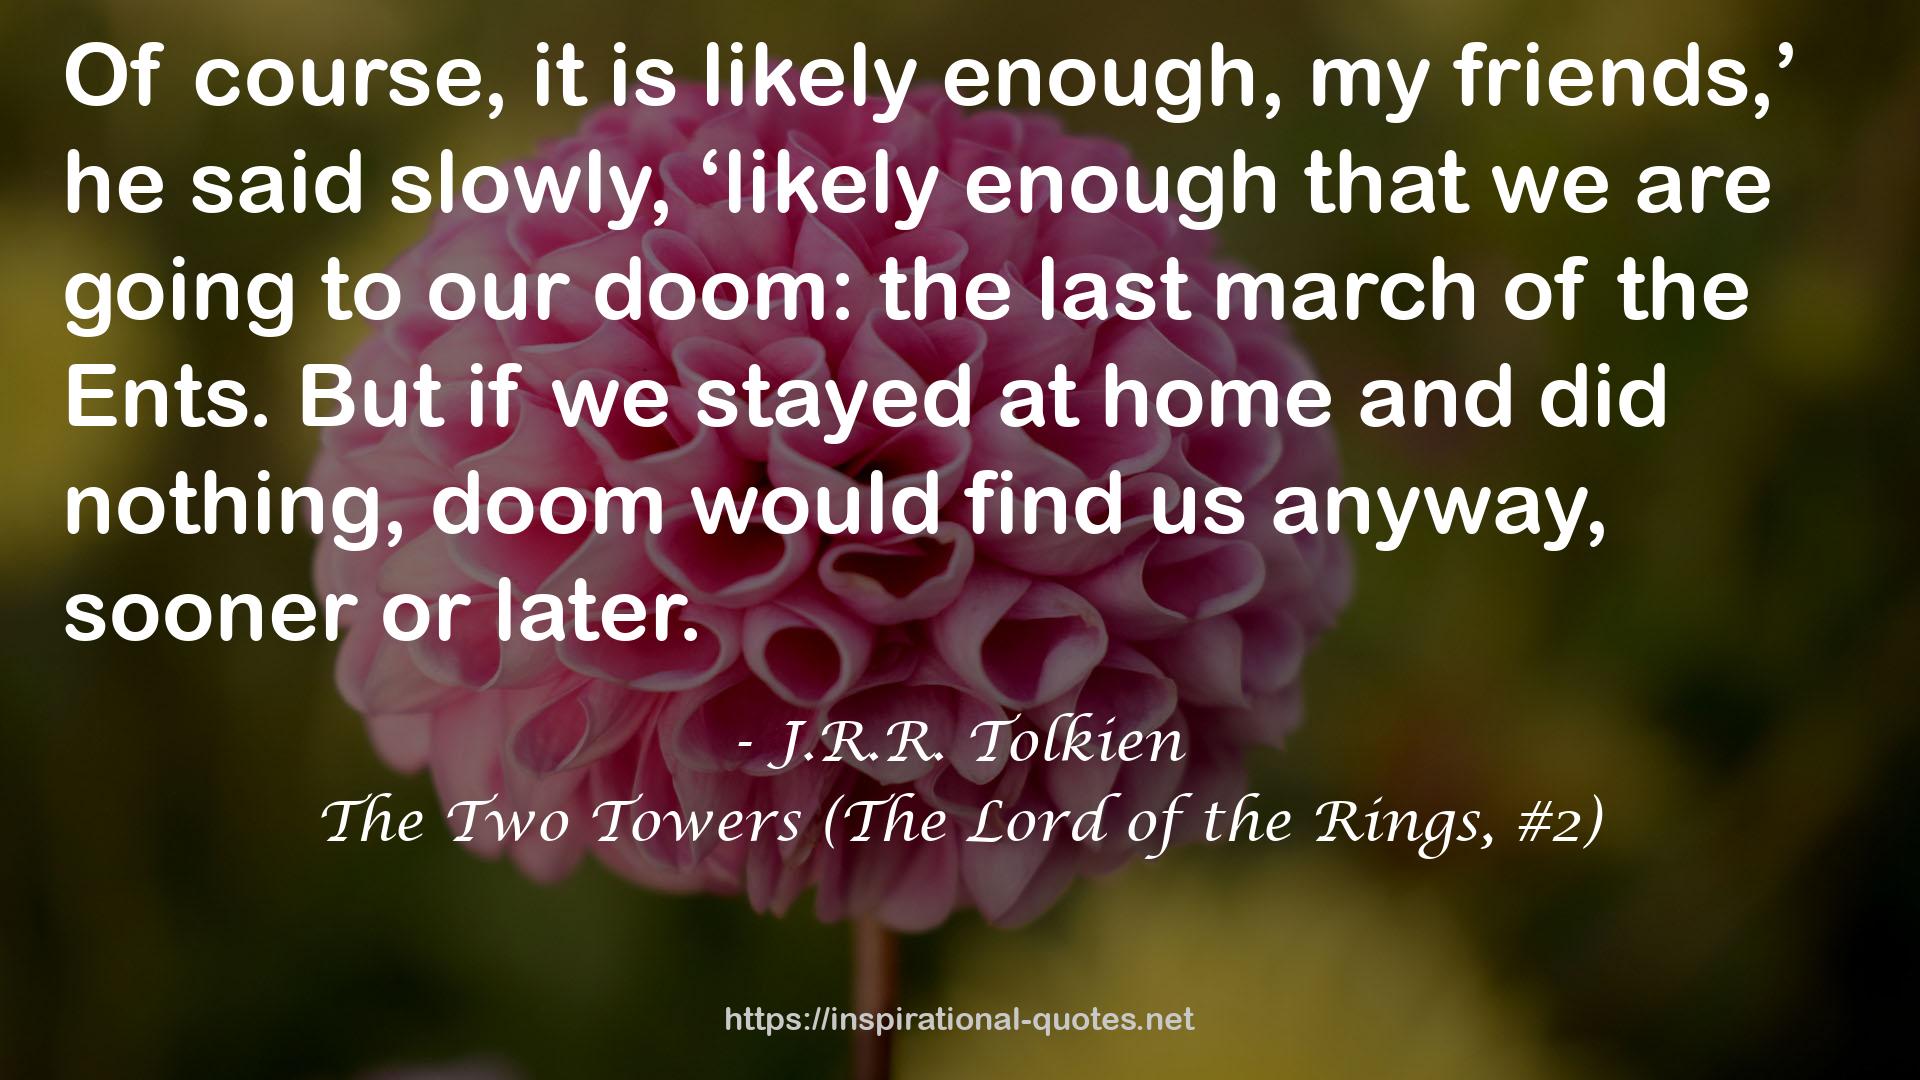 The Two Towers (The Lord of the Rings, #2) QUOTES